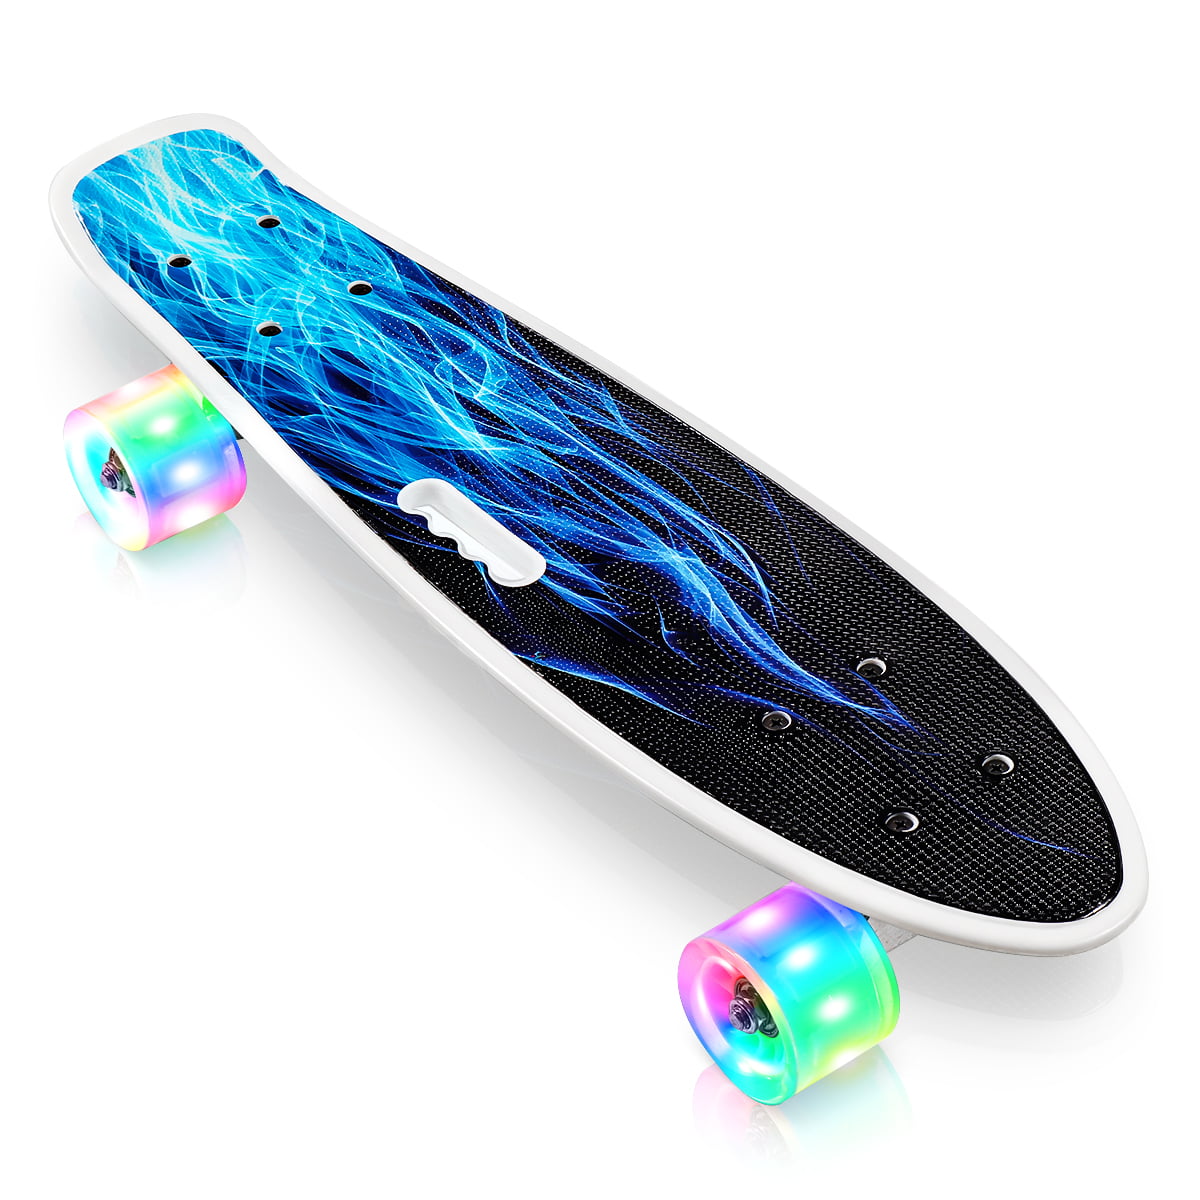 Details about   22 Inch Complete Mini Cruiser Skateboard with LED Light Up Wheels for kids c 09 